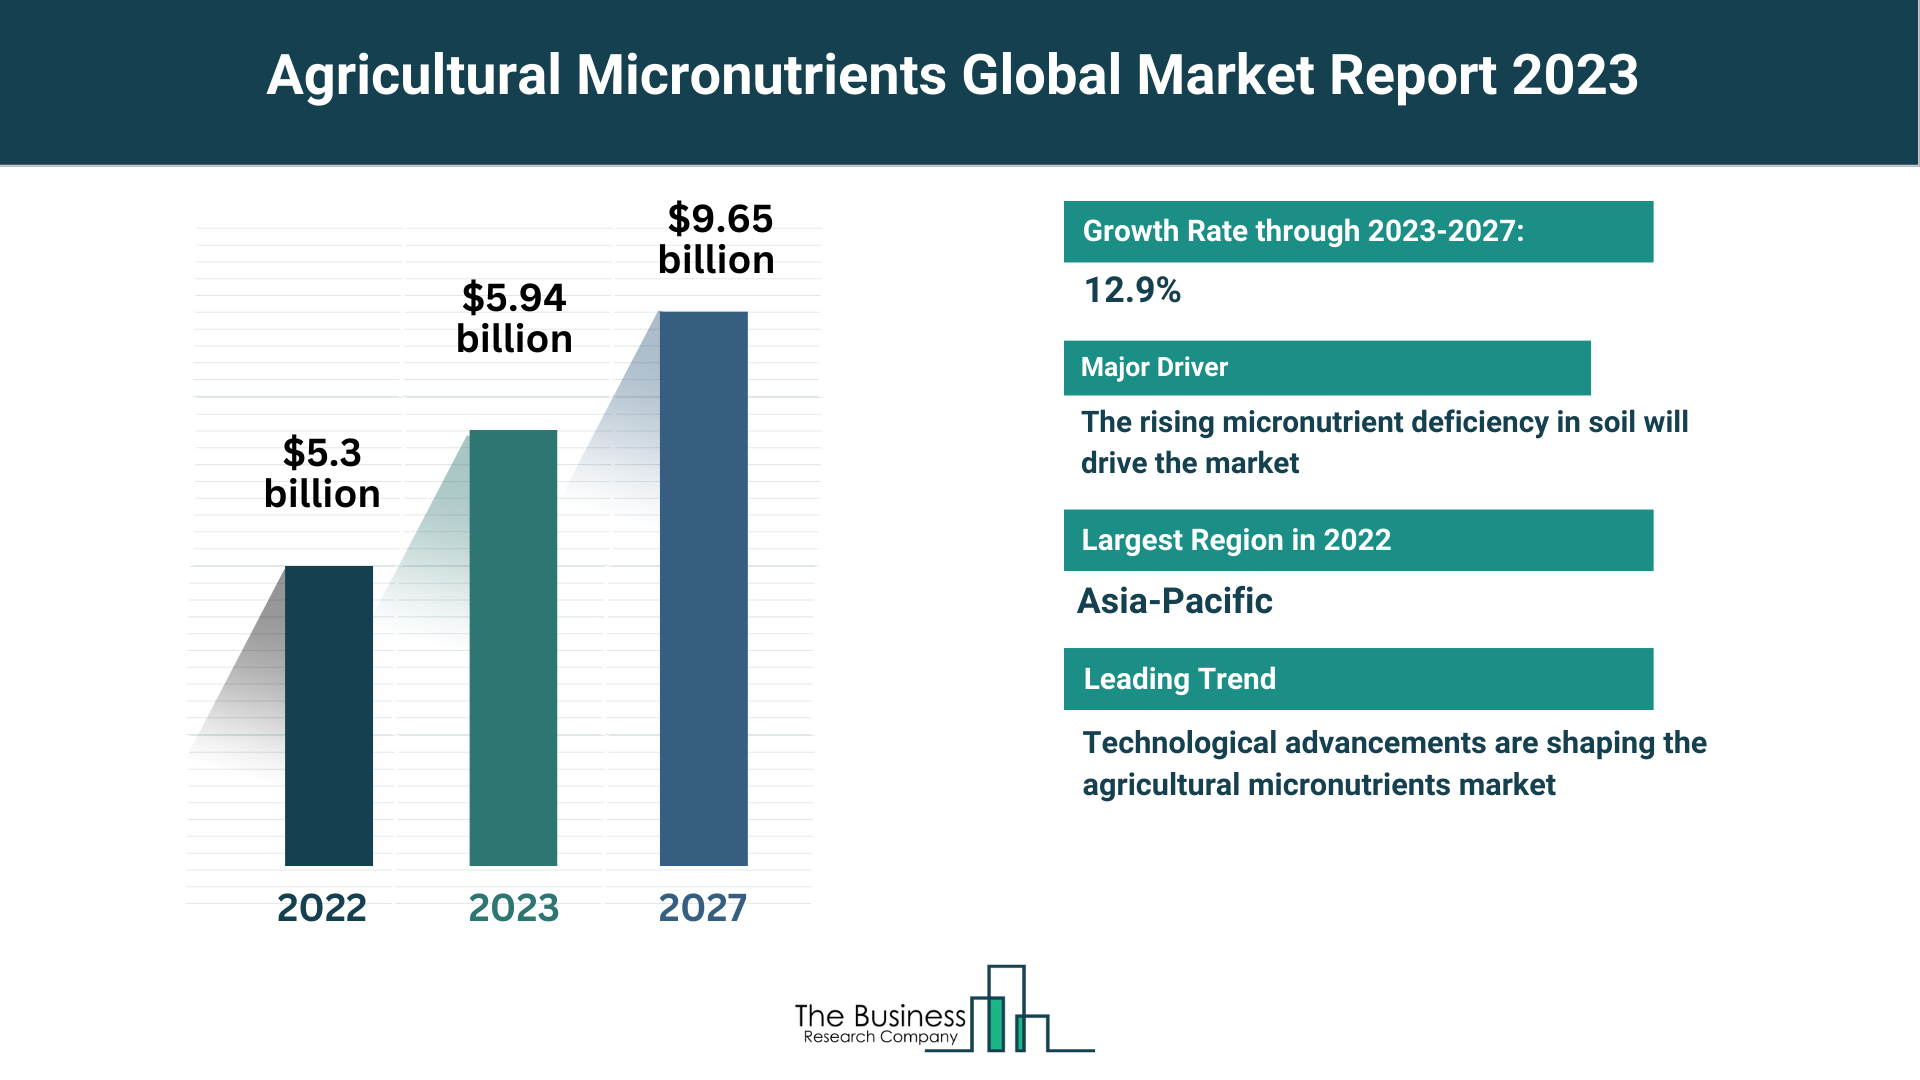 Global Agricultural Micronutrients Market